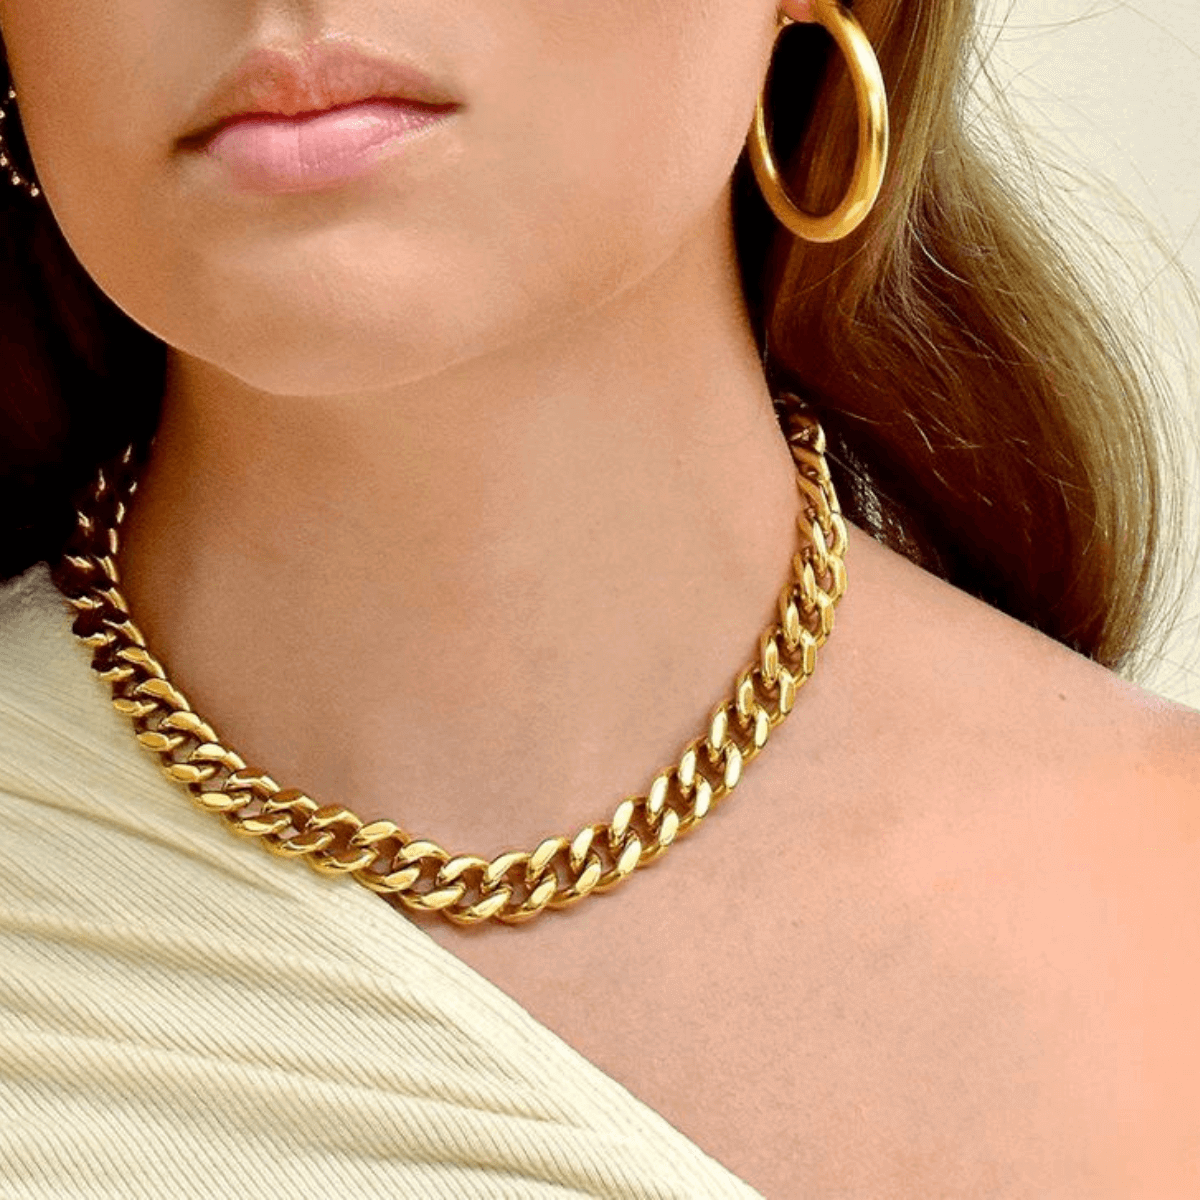 Best Gold Chain Necklace Jewelry Gift | Best Aesthetic Yellow Gold Chunky Chain Necklace Jewelry Gift for Women, Girls | Mason & Madison Co. Gold